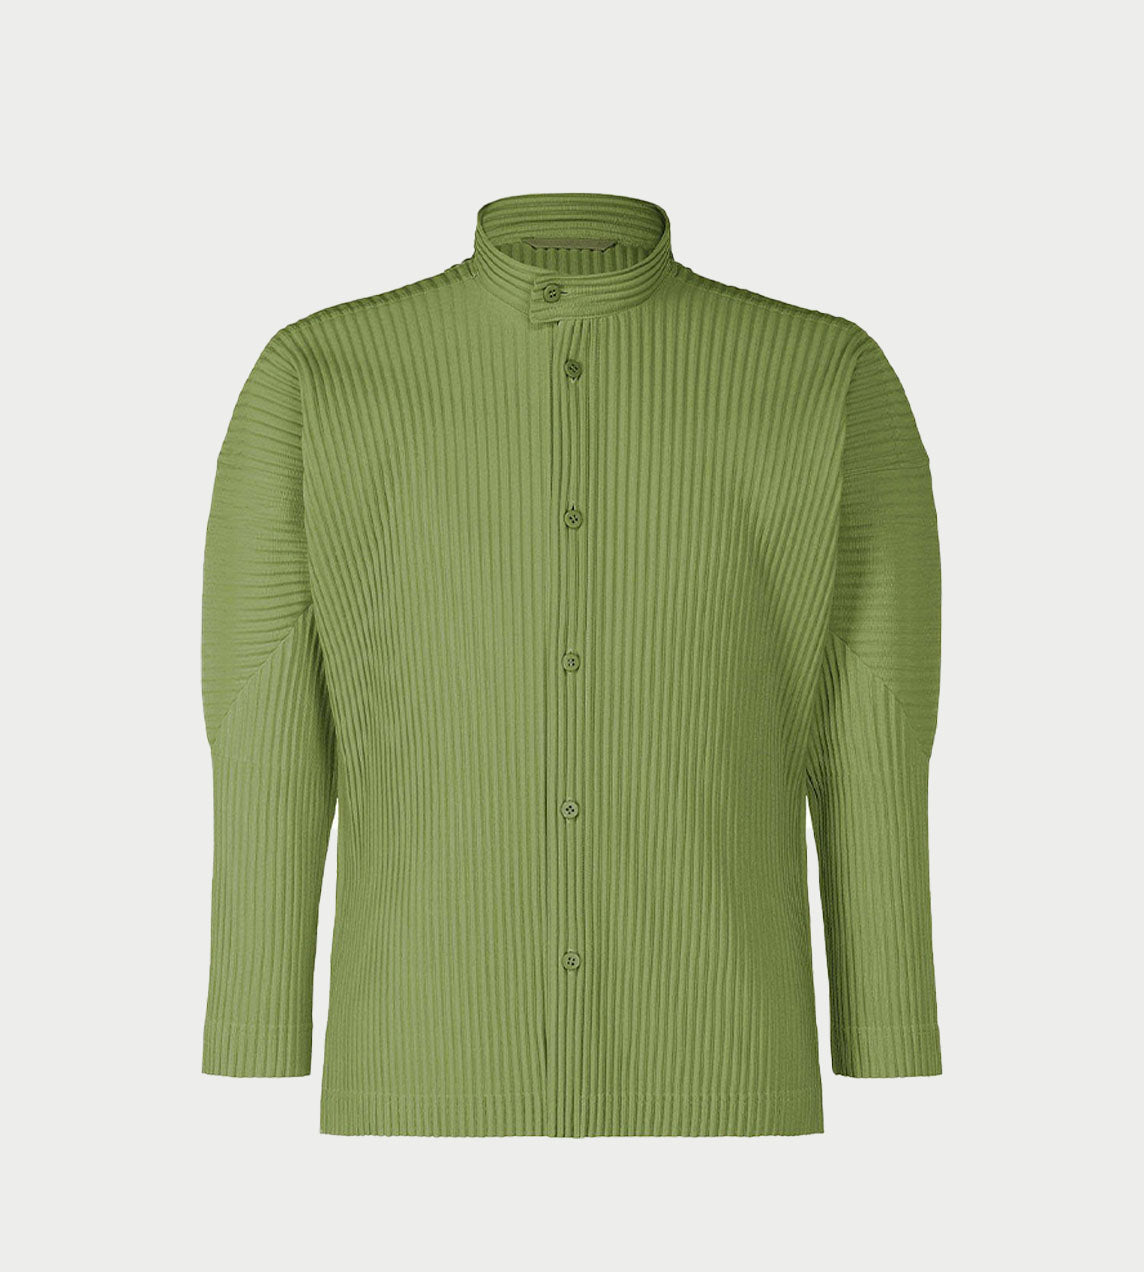 Homme Plisse Issey Miyake - Pleated Shirt Olive Green